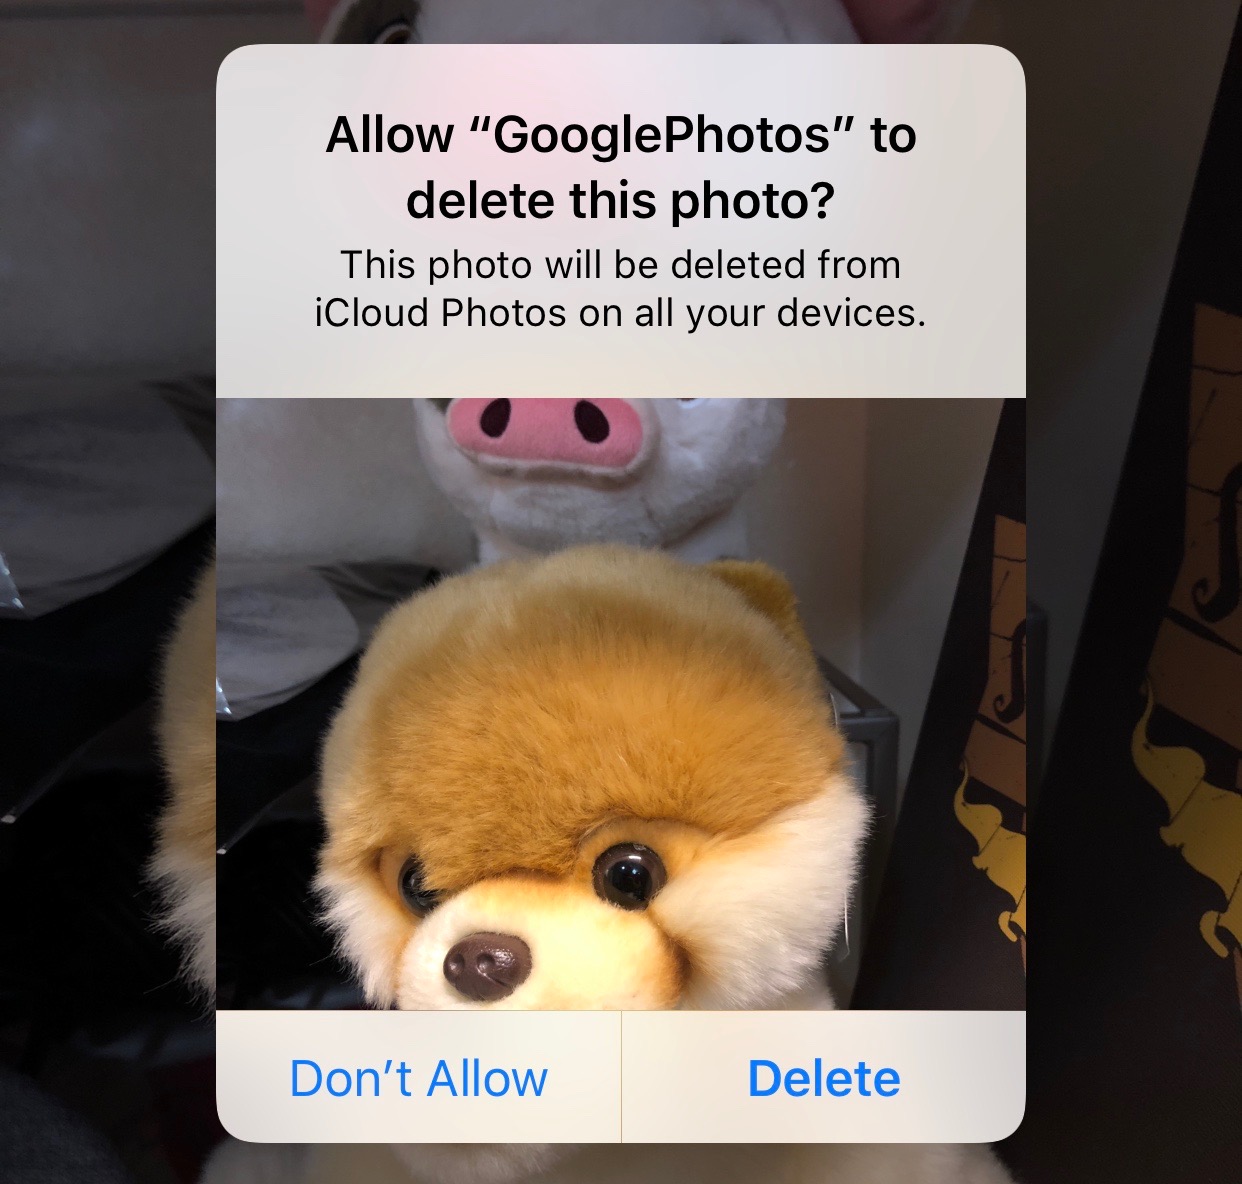 Why Did ICloud Delete All Of My Photos?